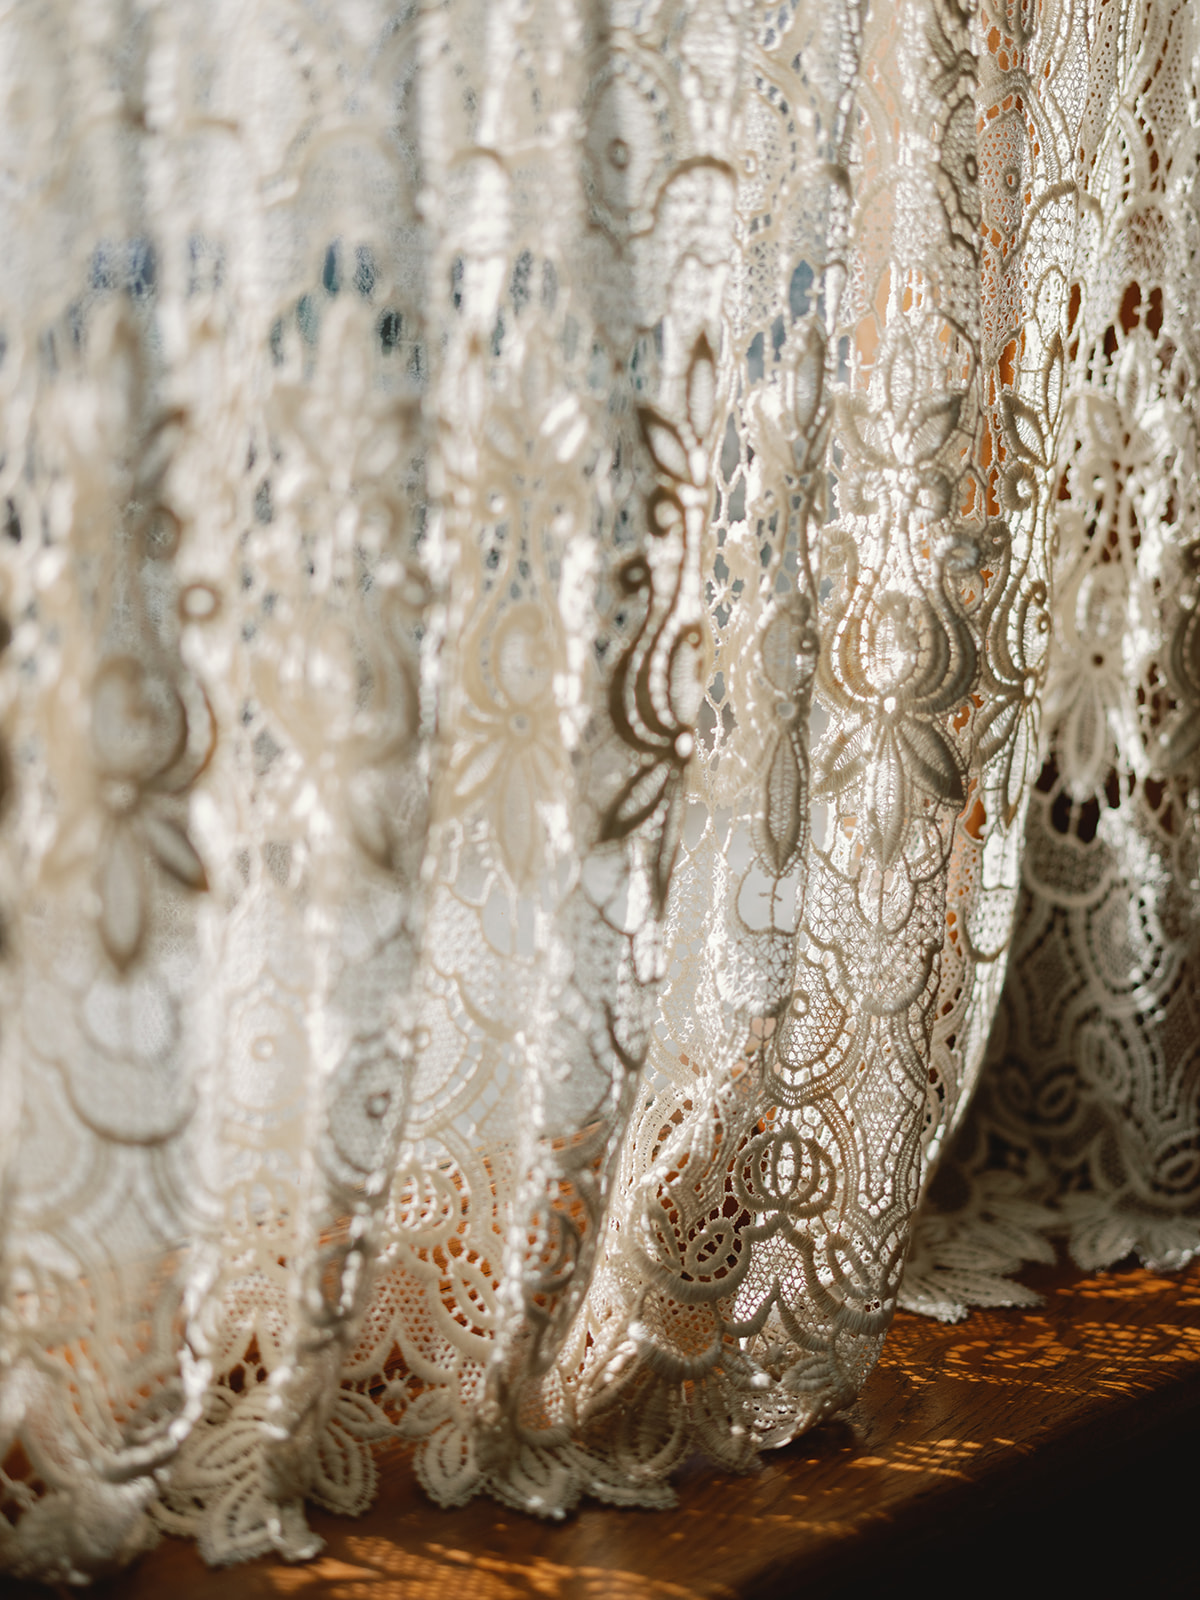 Lace white curtain with light and shadows on a window sill